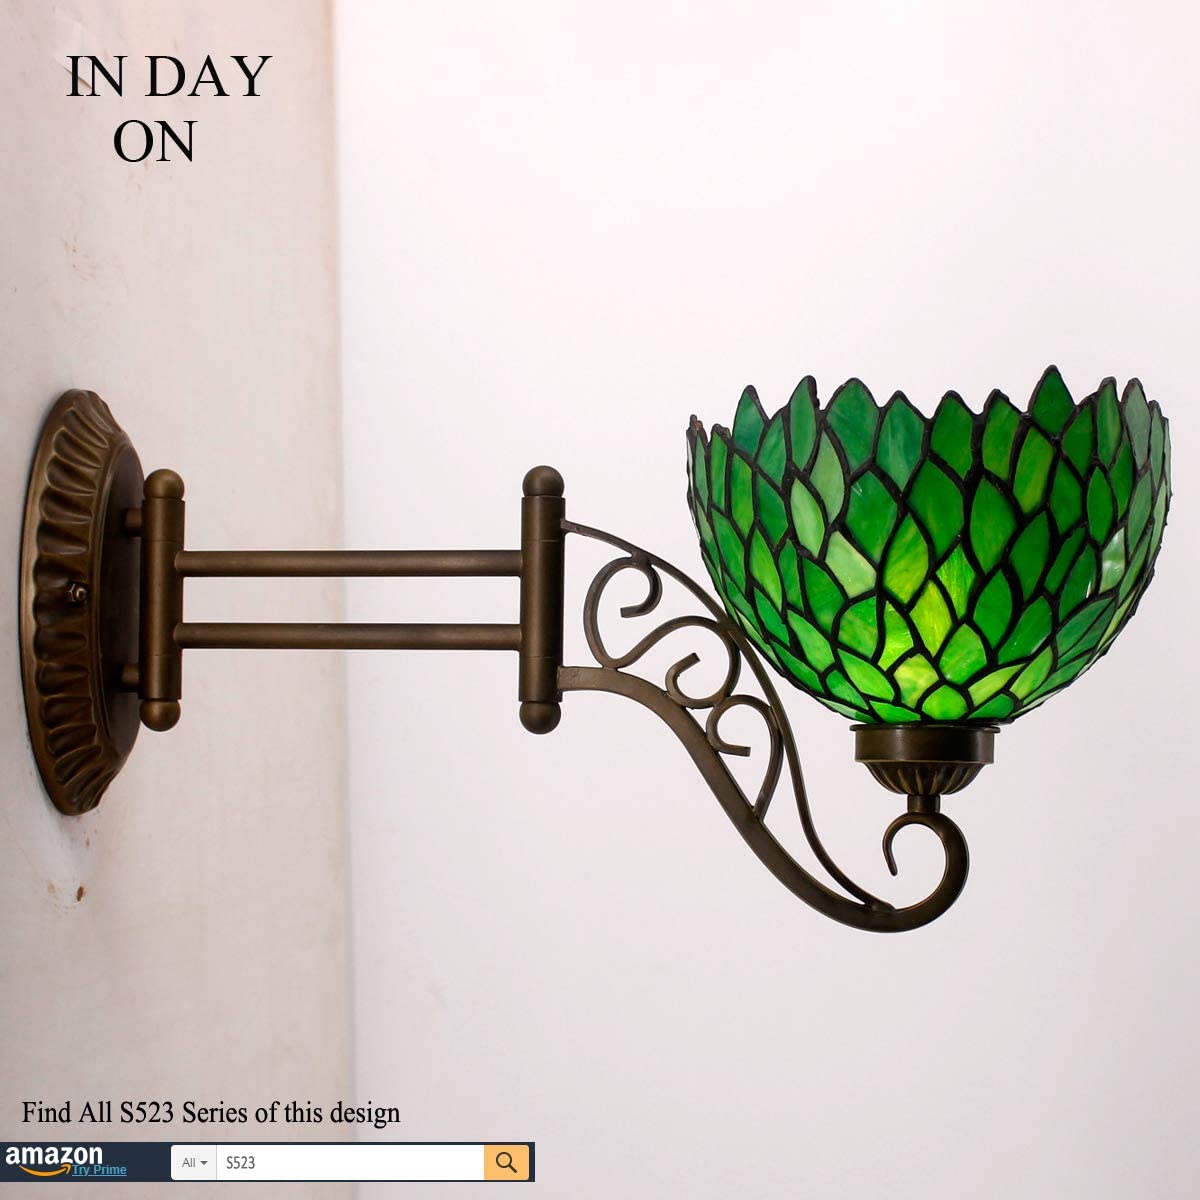 WERFACTORY Tiffany Wall Sconce Lamp W8L19 Inch Swing Arm Up Down Light Green Stained Glass Wisteria Shade S147 Living Room Bedroom Office Study Antique Metal